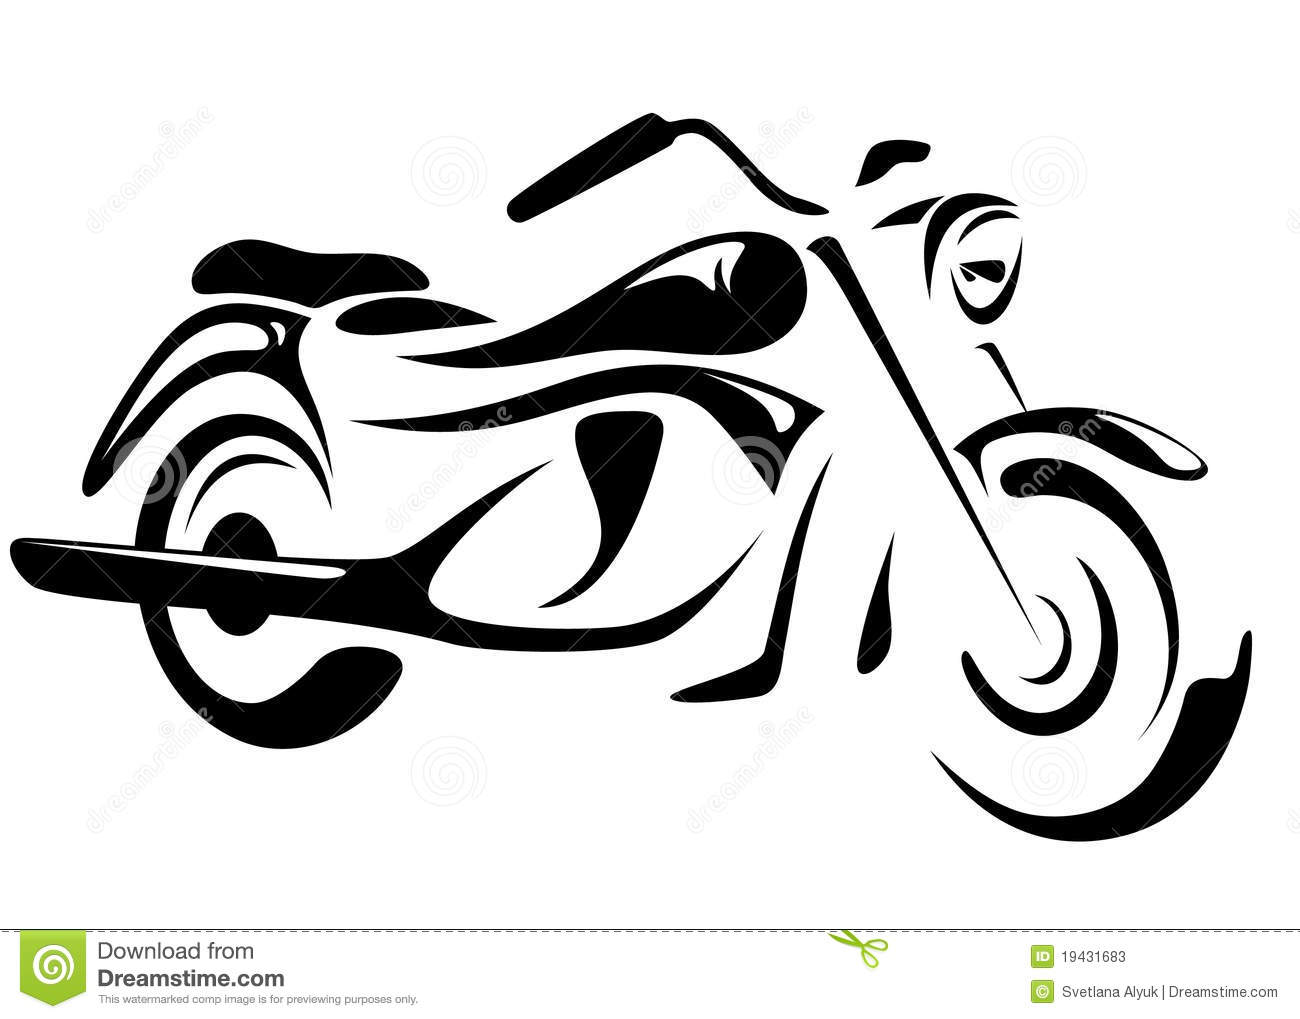 Images For u0026gt; Motorcycle Rider Clip Art | Inspiration | Pinterest | Clip art, Search and Bikes